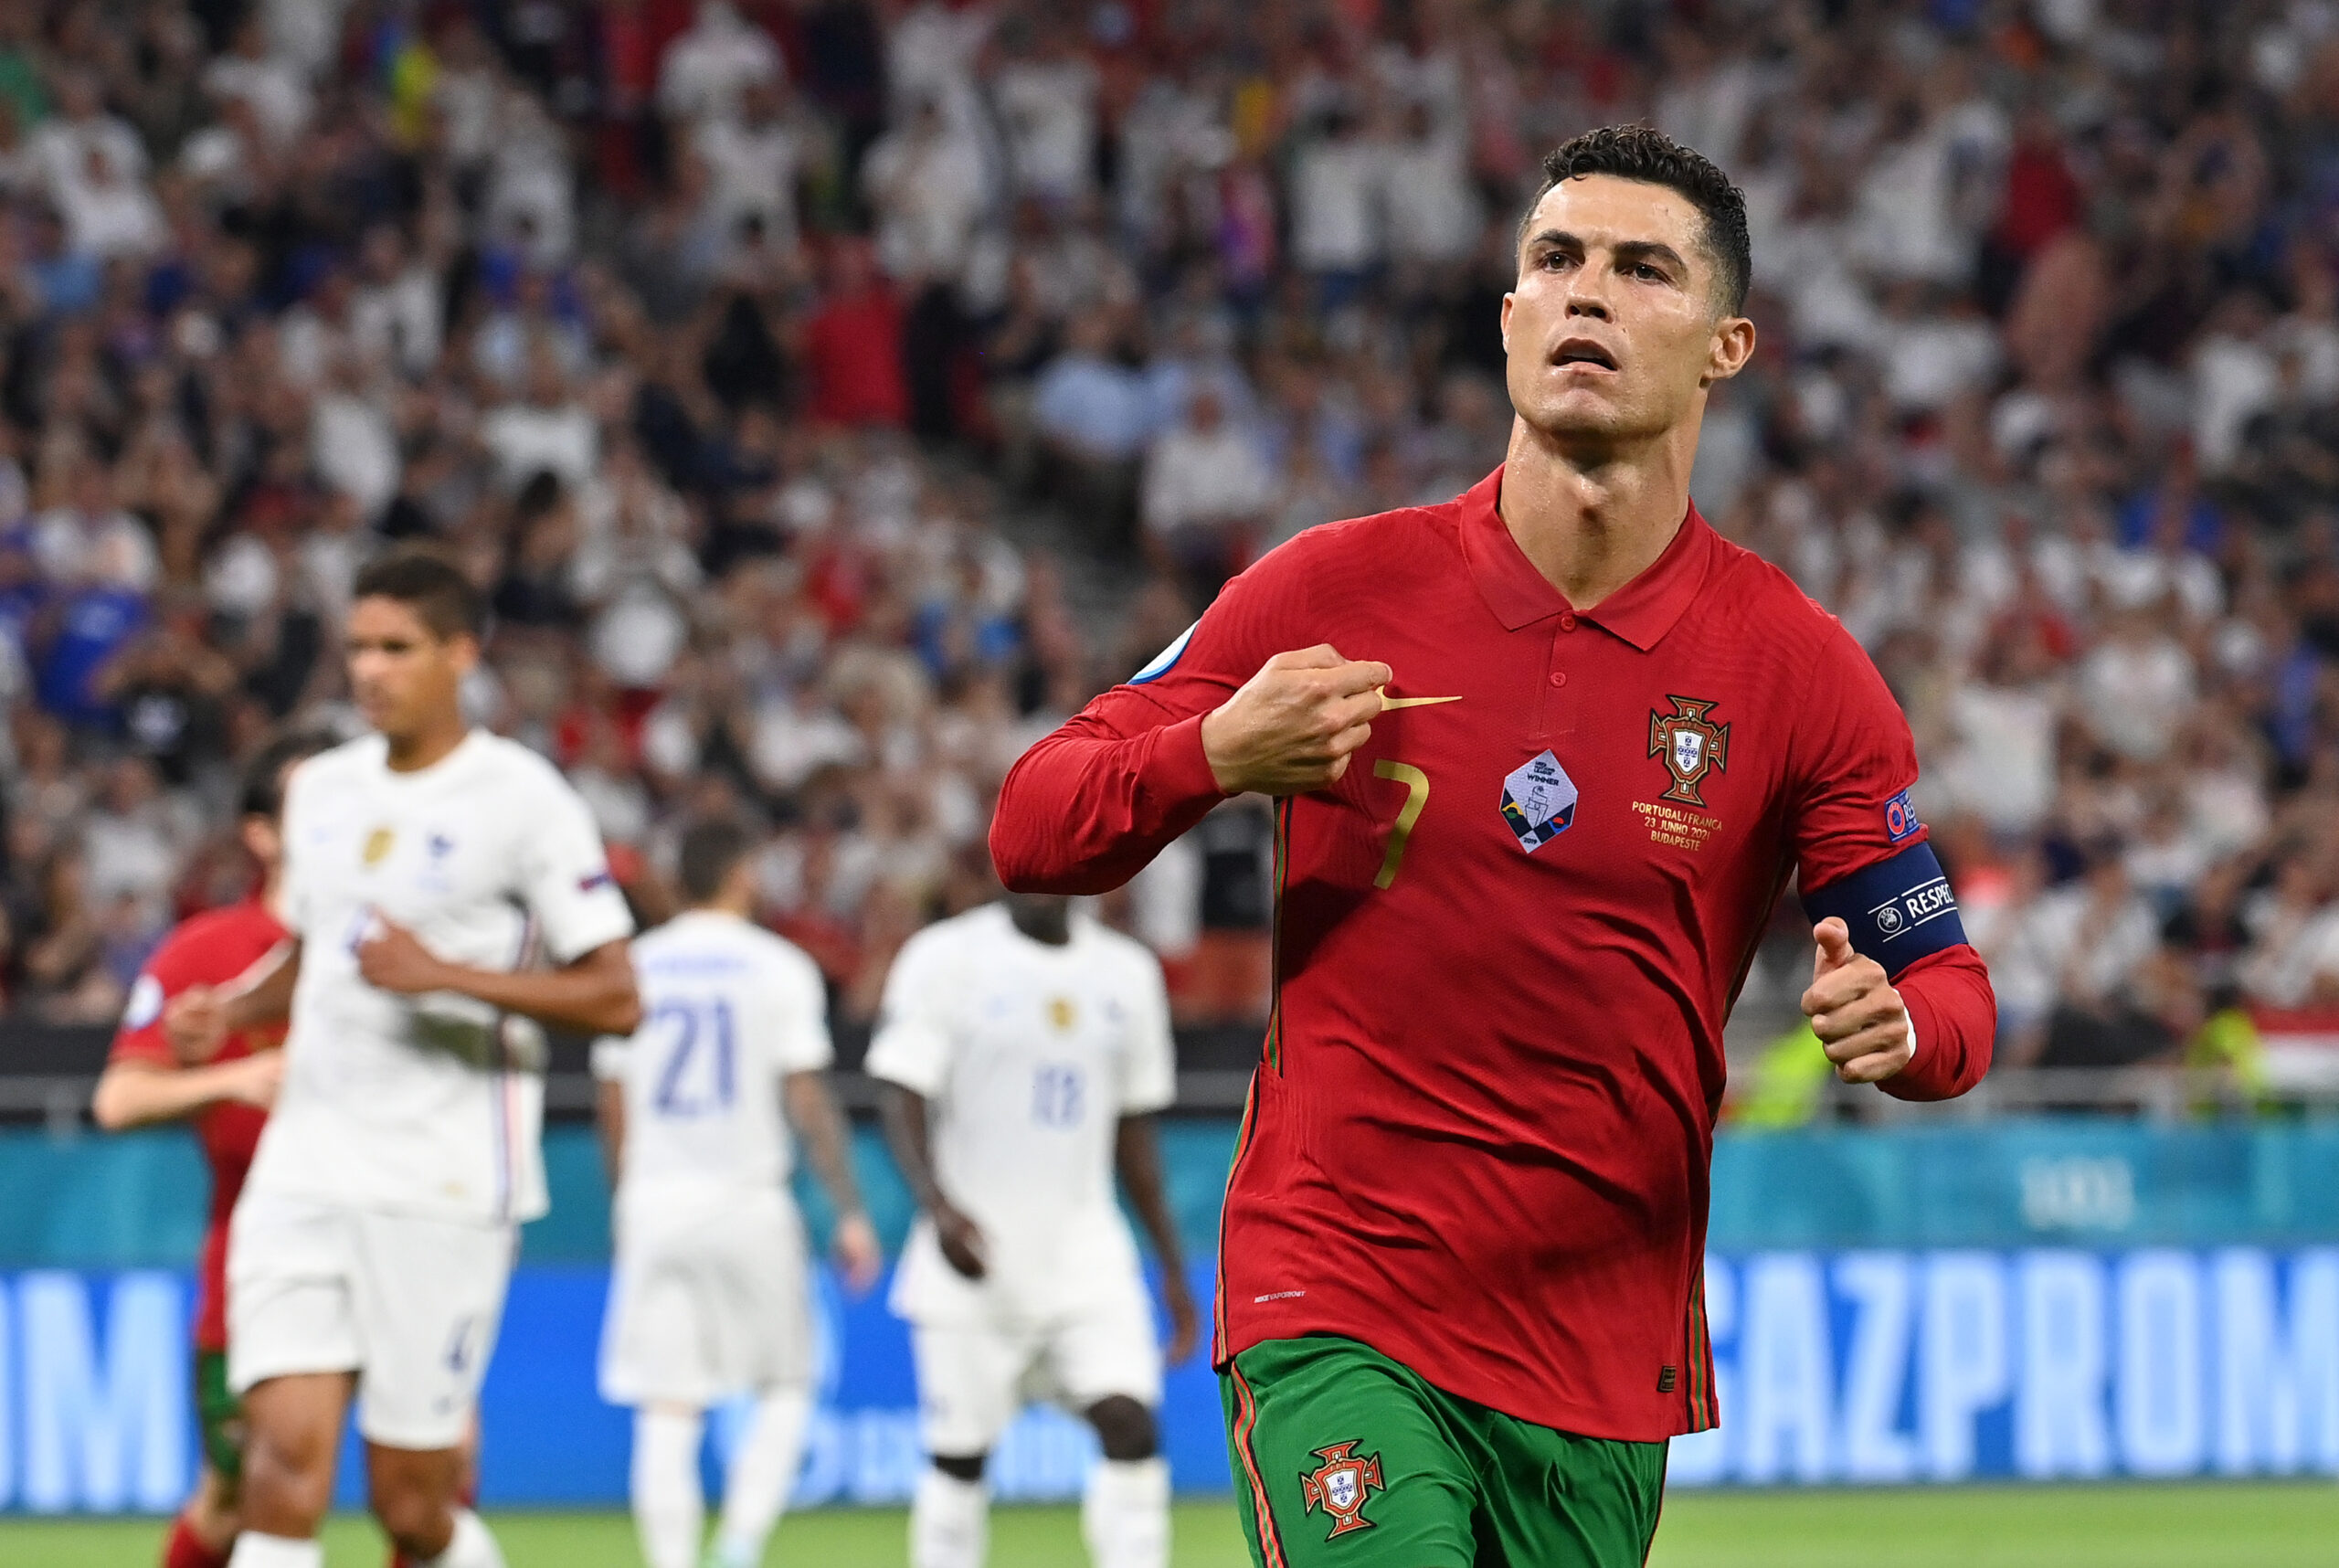  2022 WC qualifiers: Injury hit Portugal take on Turkey in the WC qualifier playoff